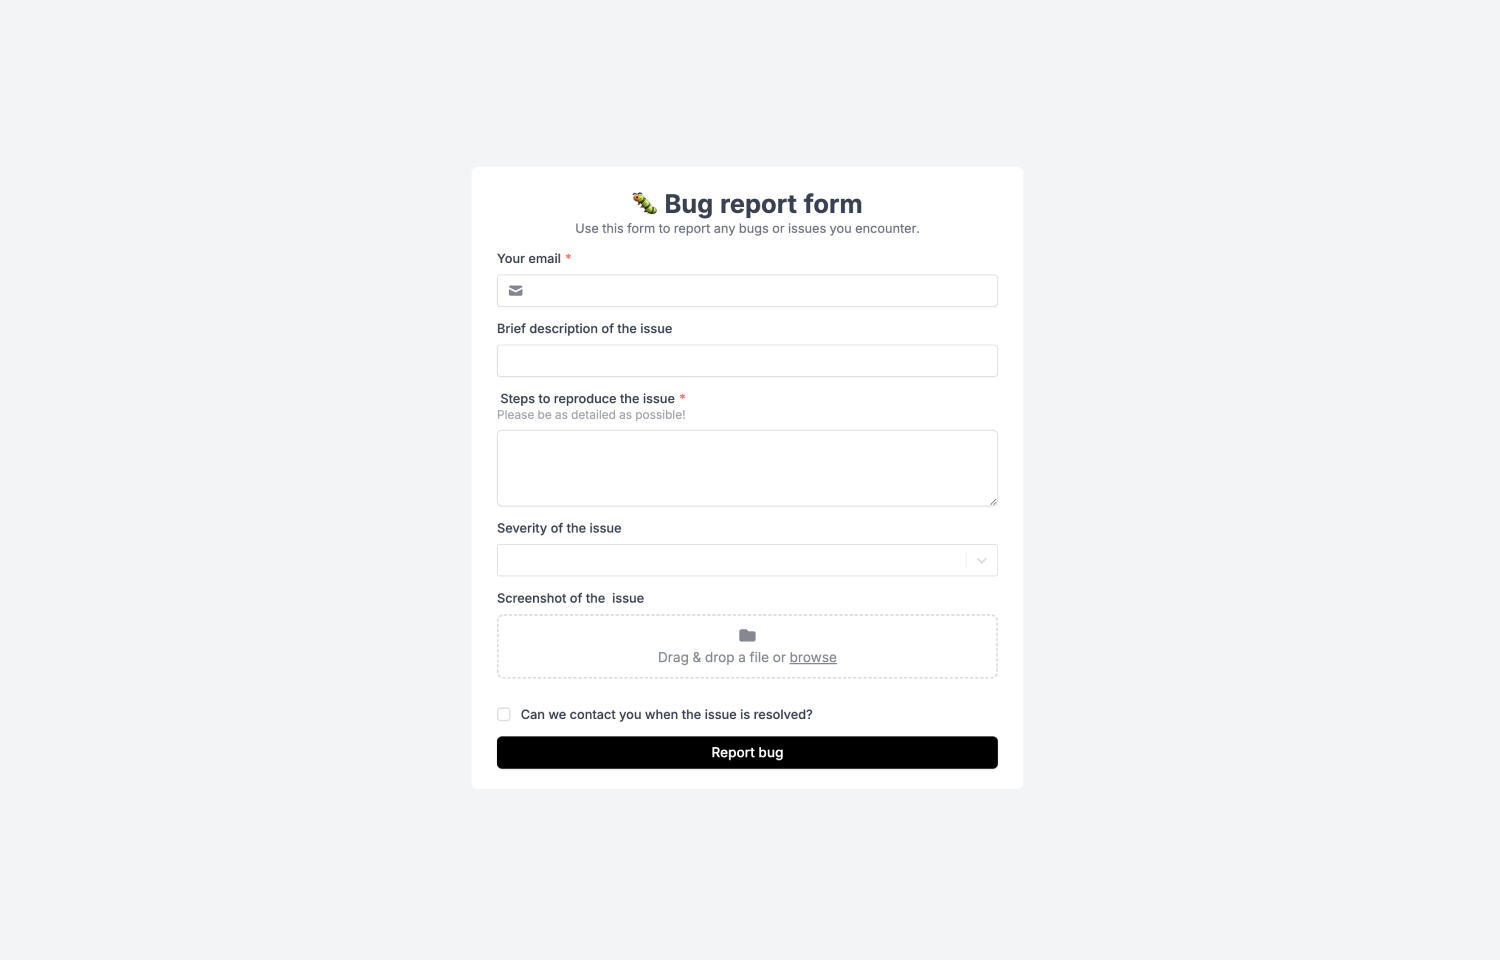 Fillout form